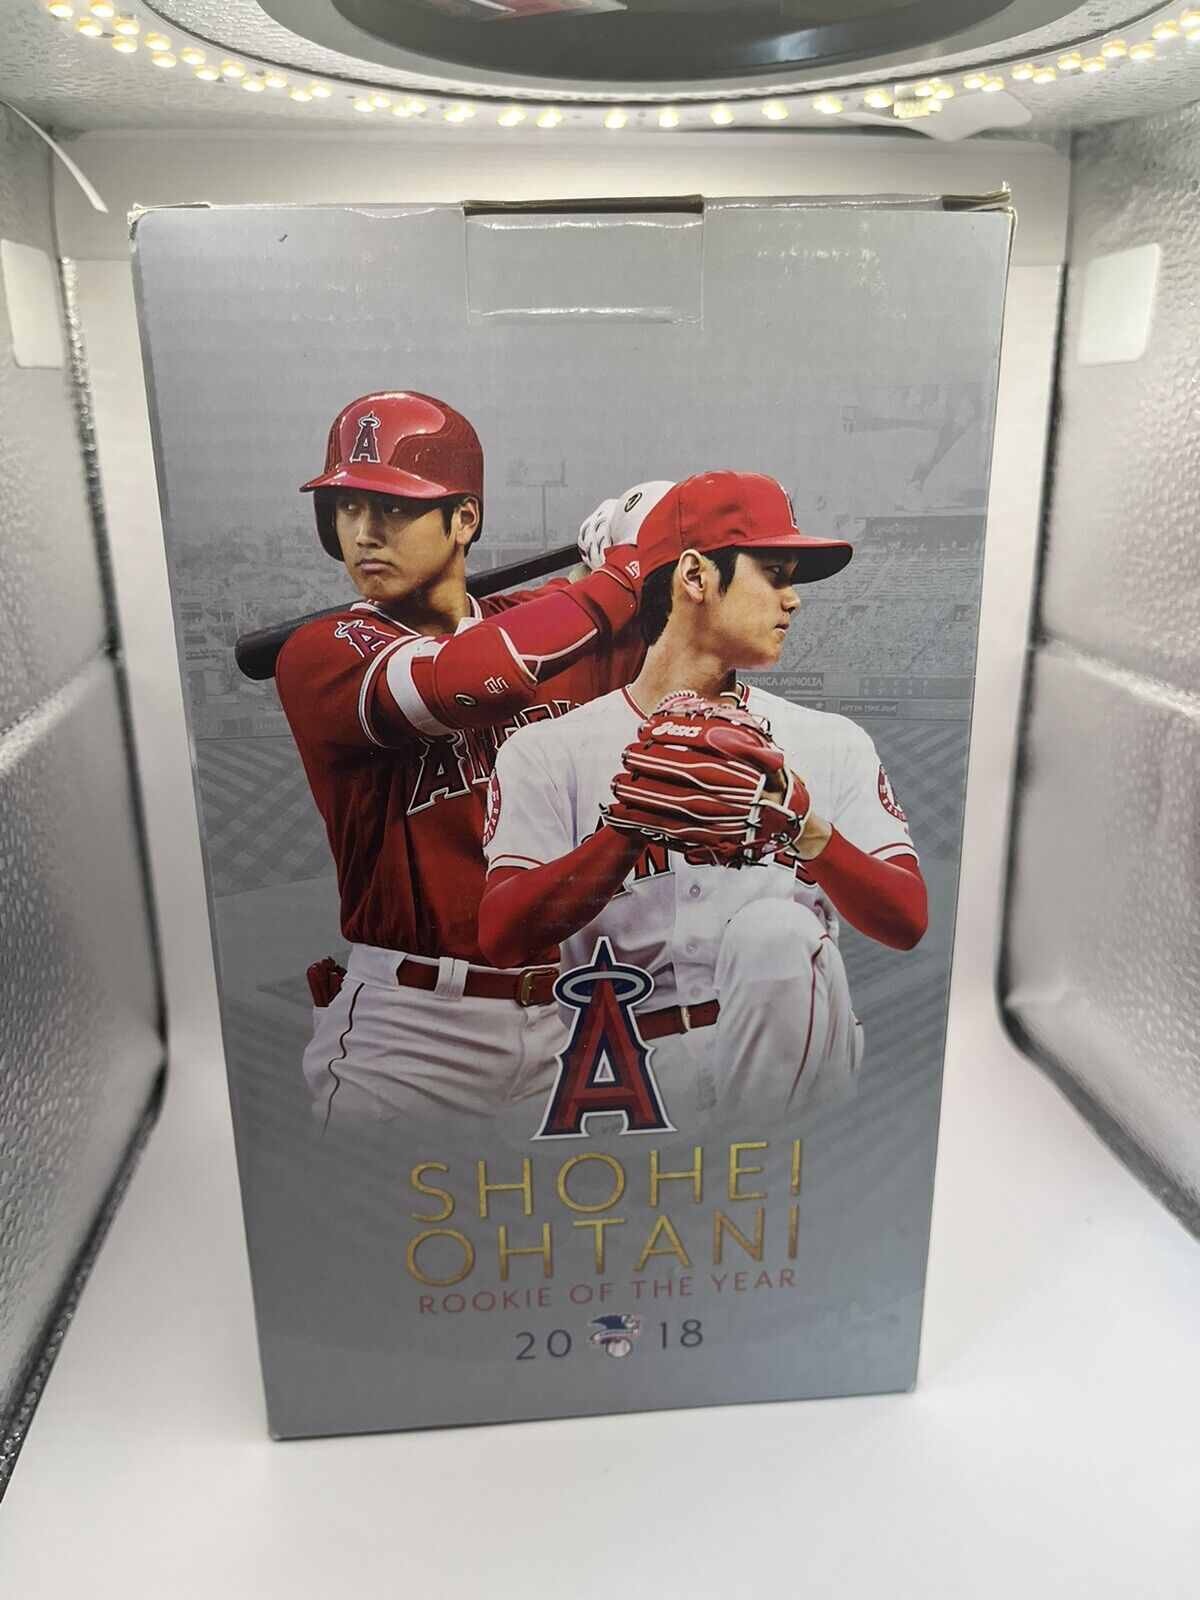 Shohei Ohtani 2018 Rookie Of The Year 2019 Angels Bobblehead (read Description)